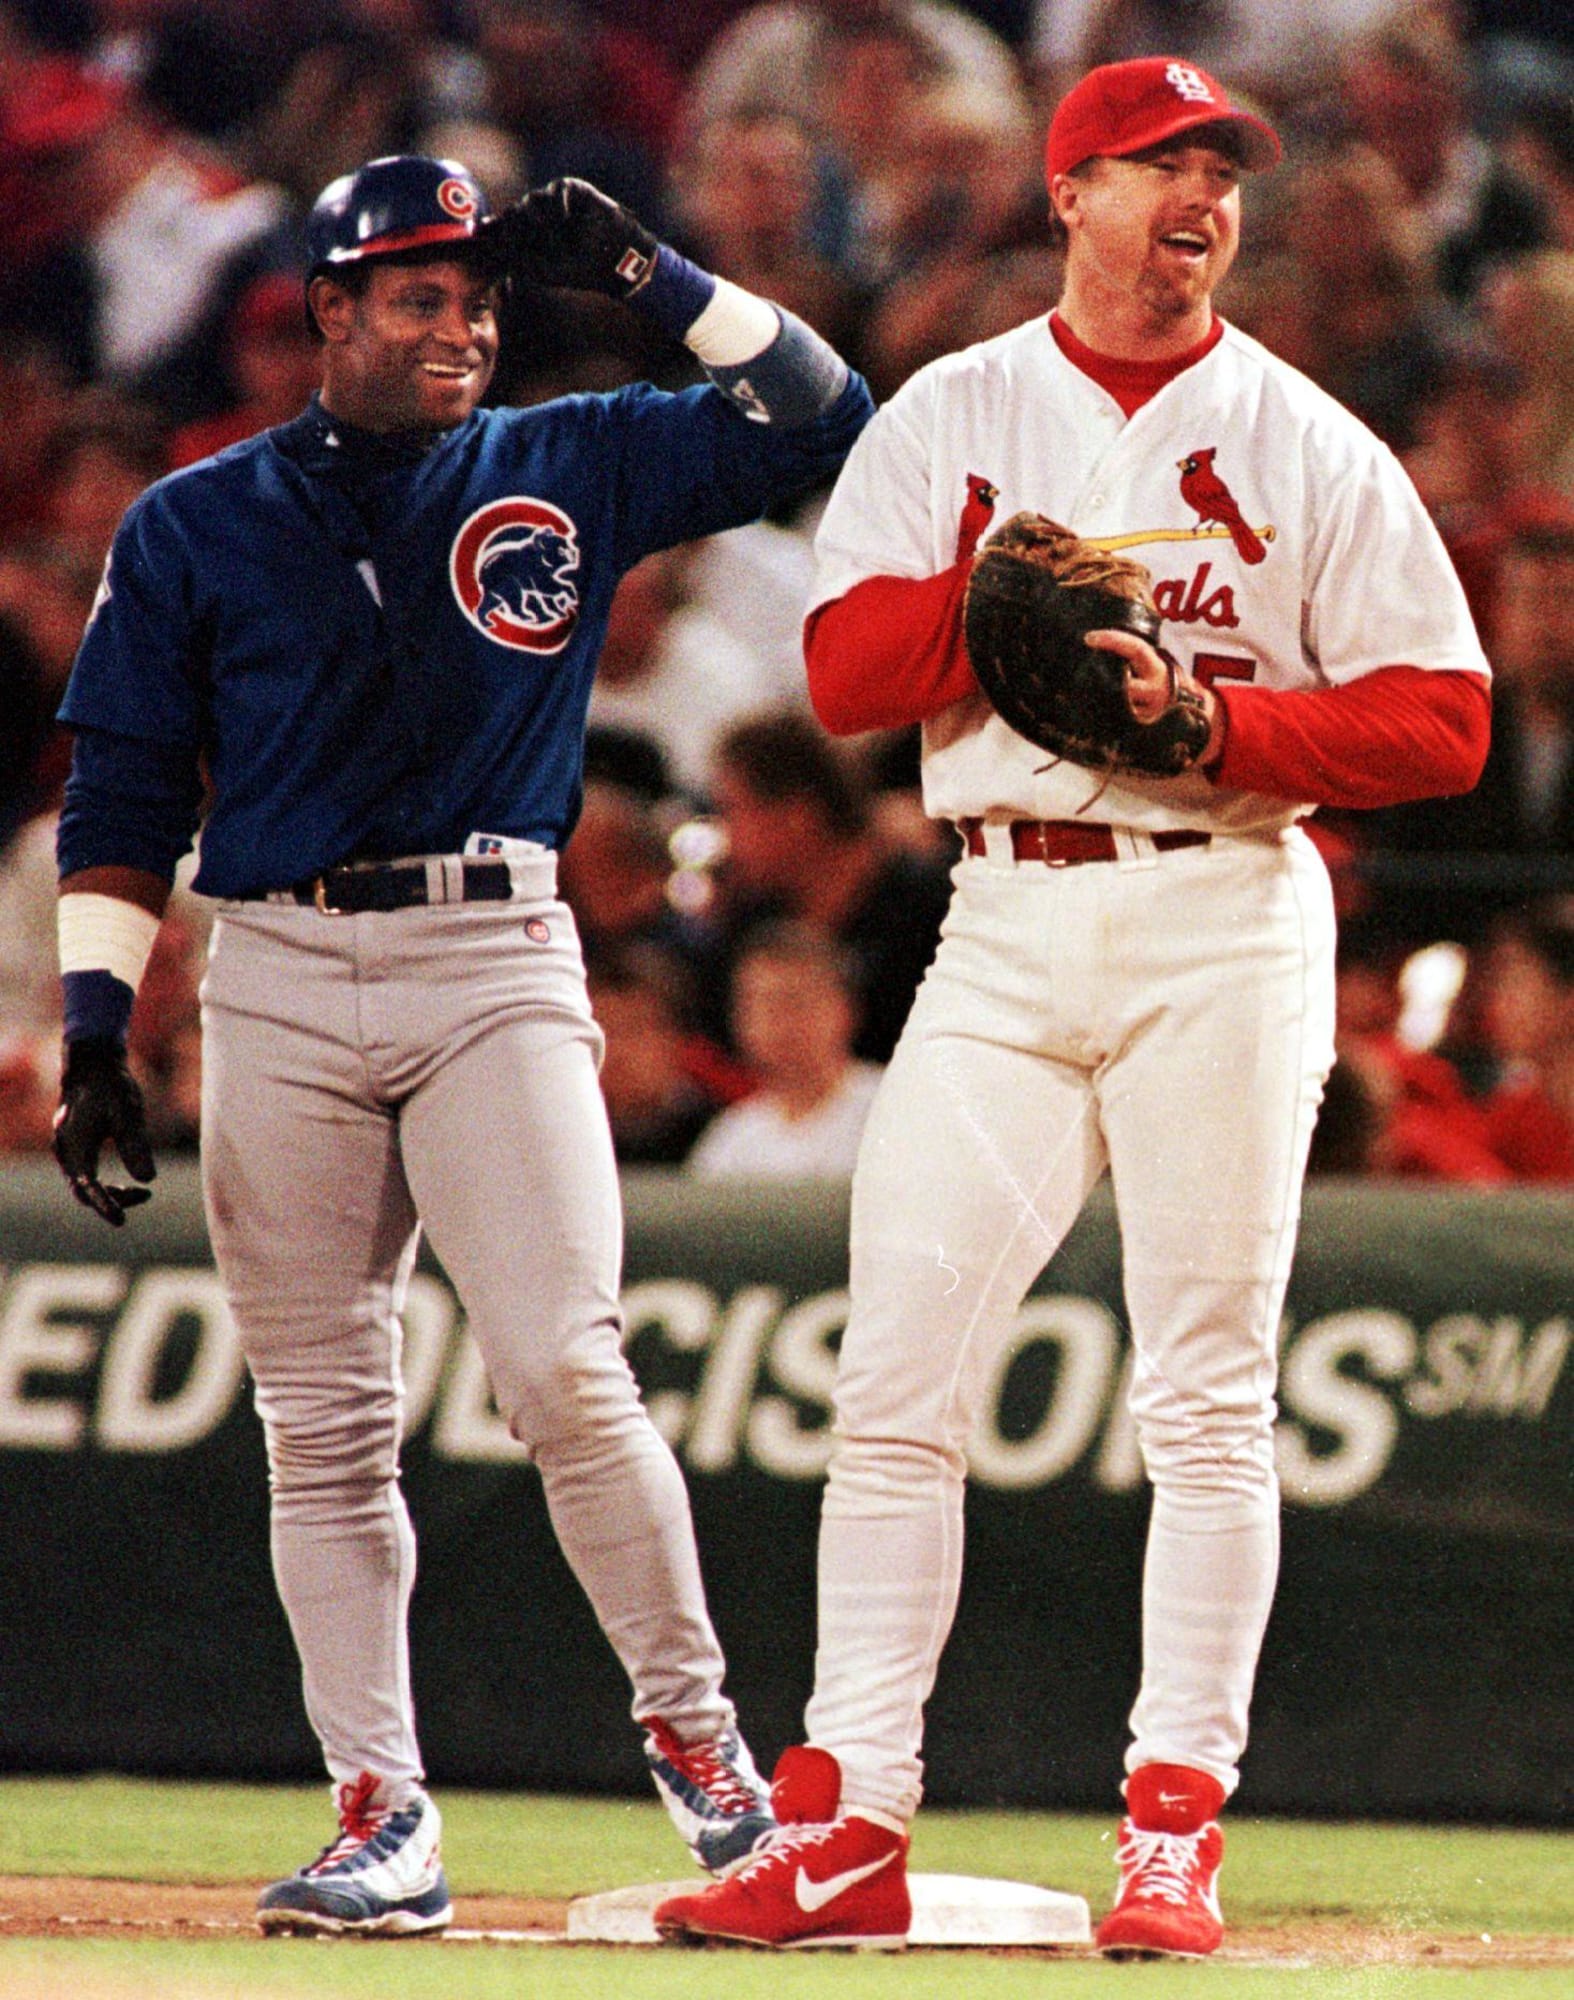 30 for 30' featuring Mark McGwire and Sammy Sosa announced!